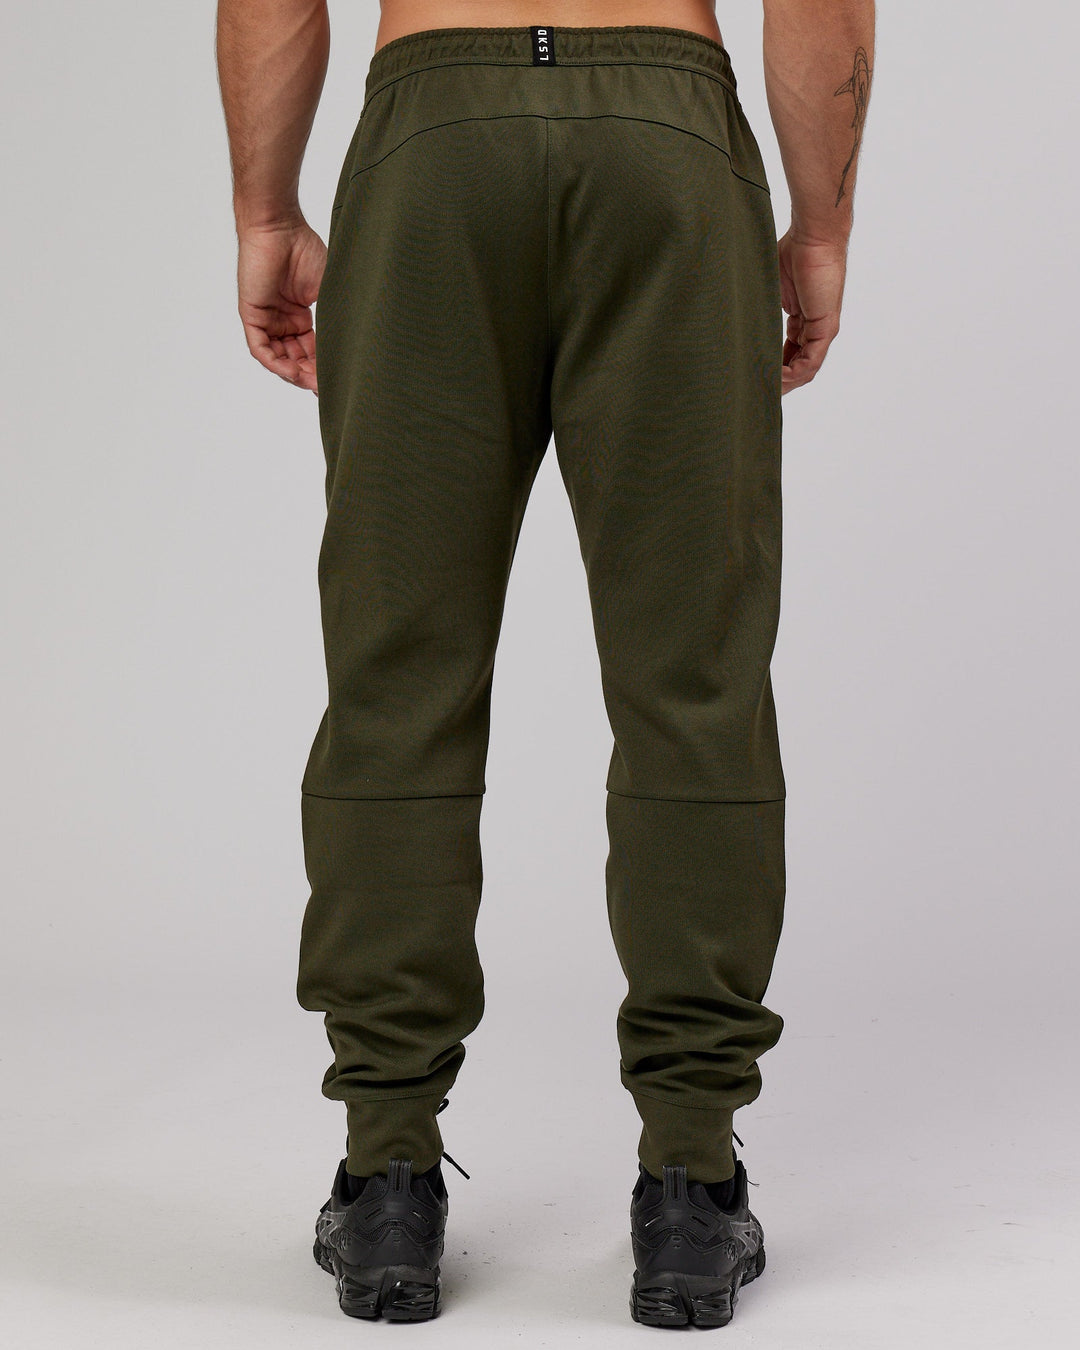 Athlete ForgedFleece Zip Jogger - Forest Night